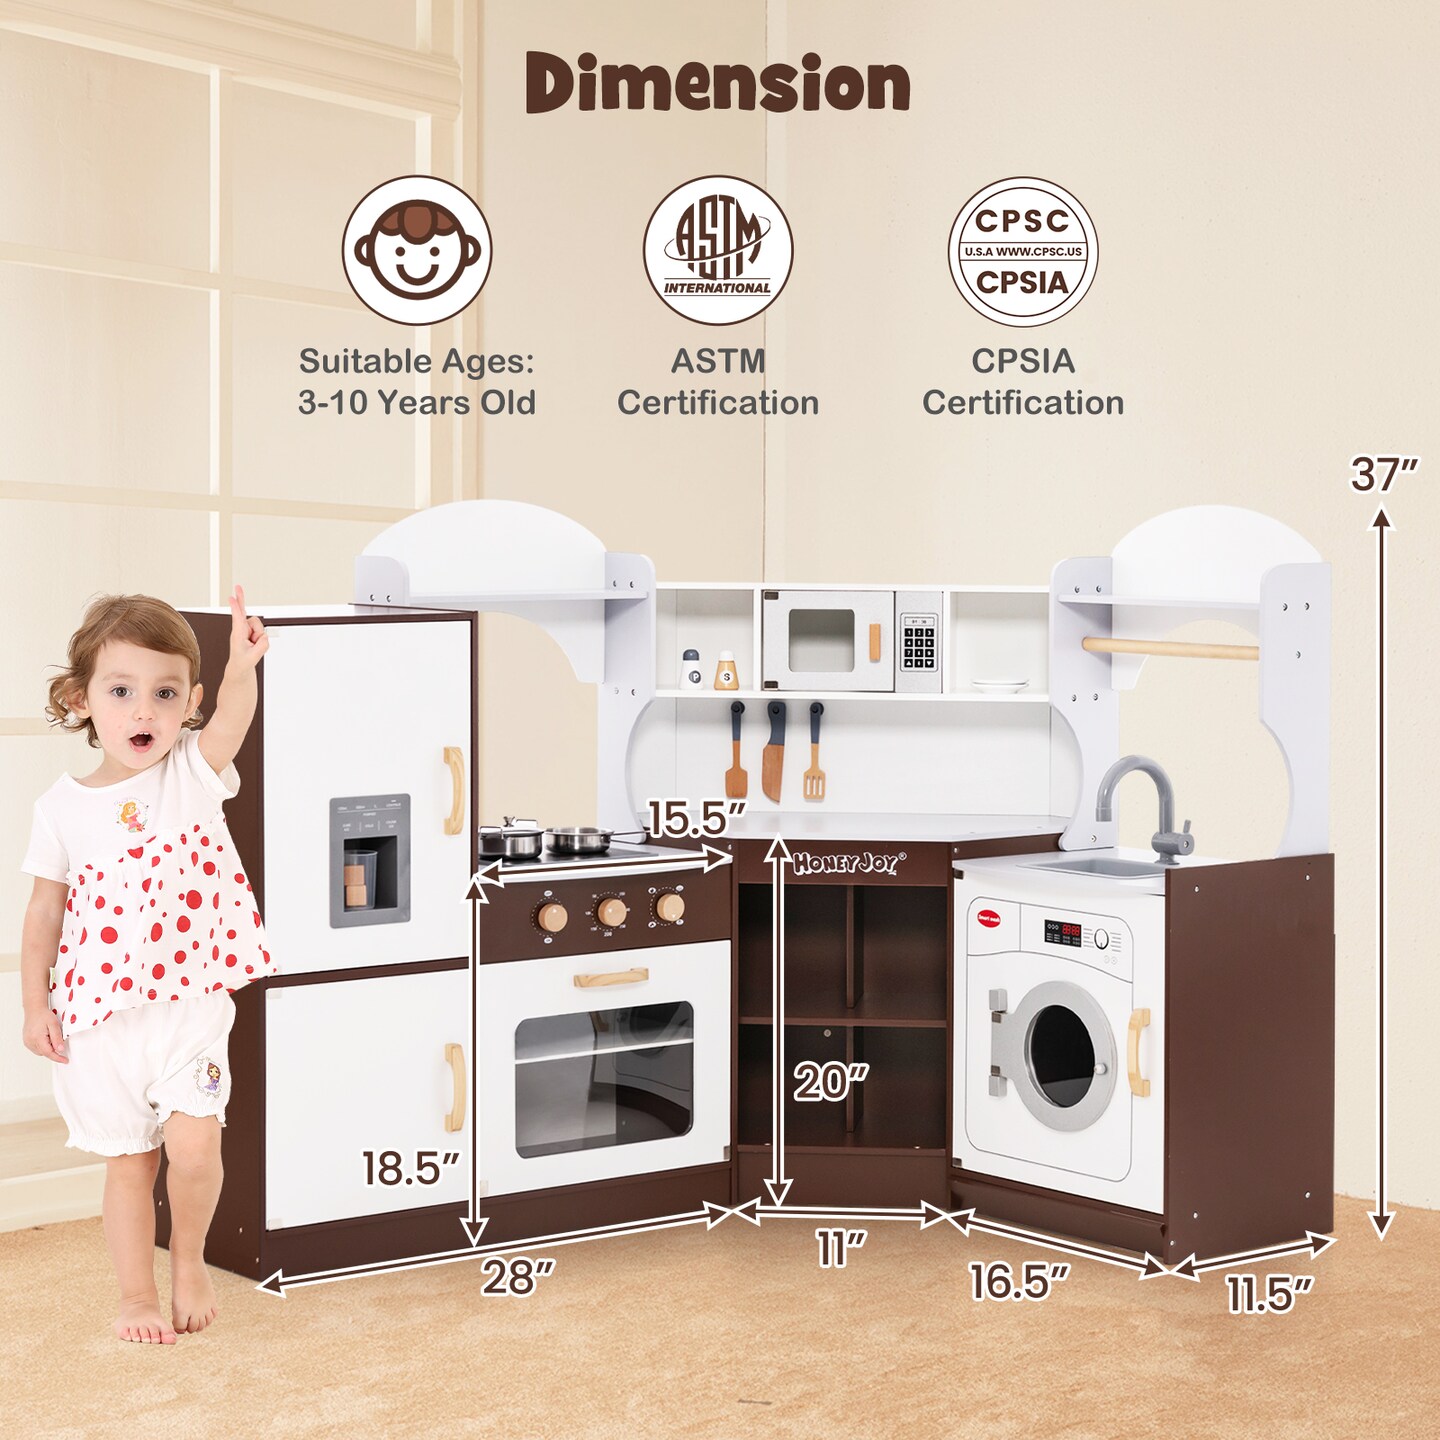 Honeyjoy Corner Play Kitchen with Ice Maker Microwave Oven for Kids 3+ Years Old Wooden Toy